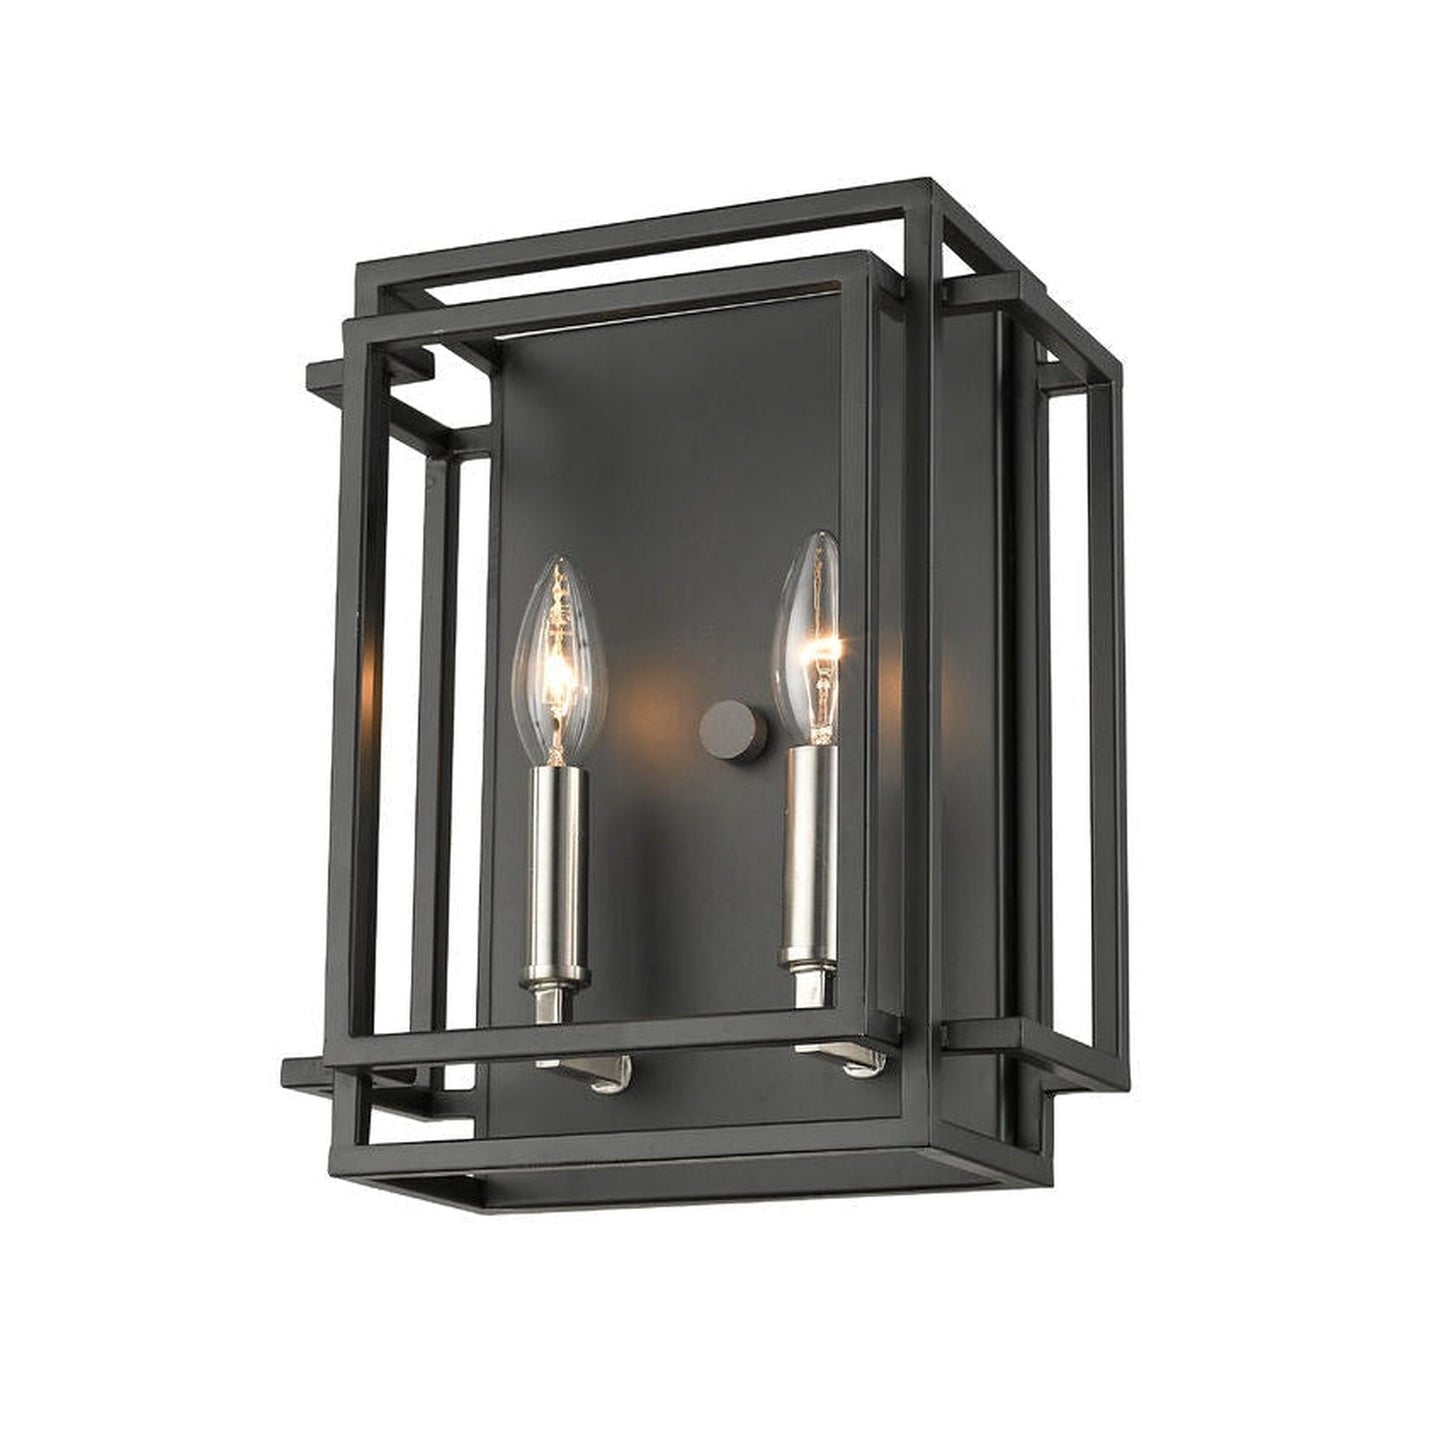 Z-Lite Titania 10" 2-Light Black and Brushed Nickel Wall Sconce